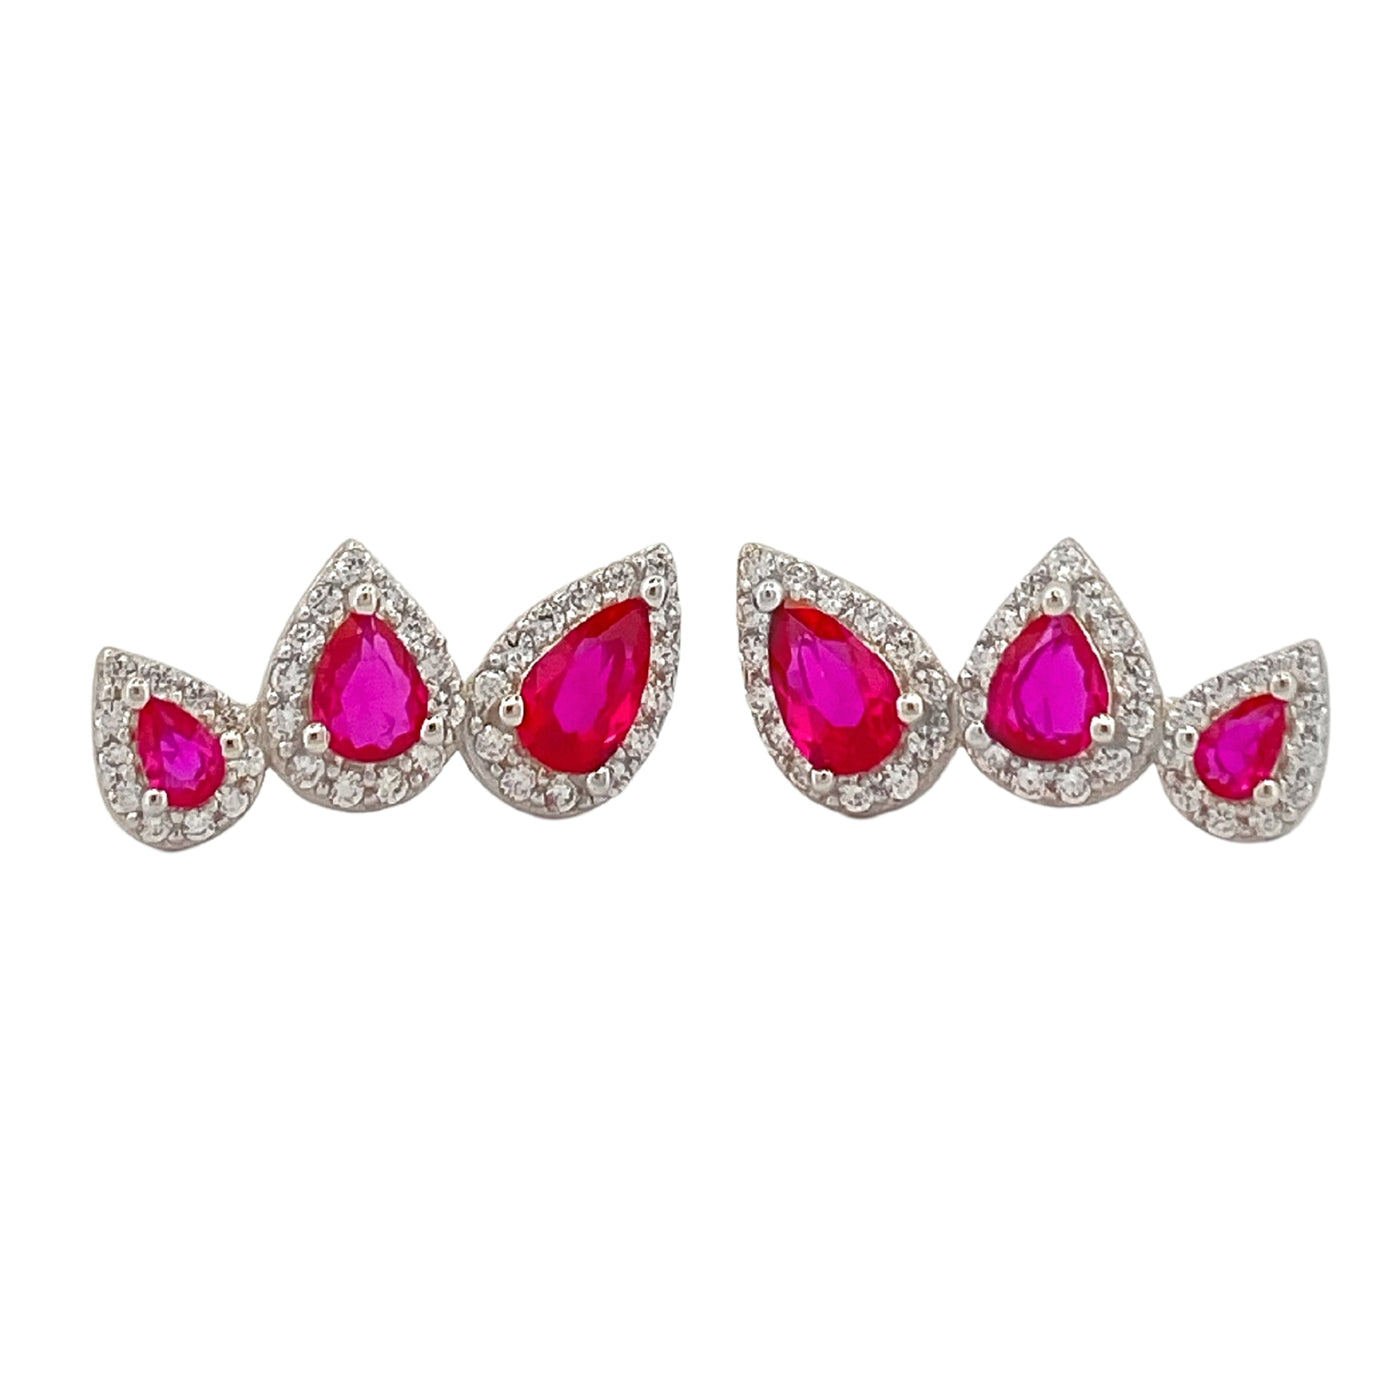 Silver stud earrings with 3 colored zirconia drops